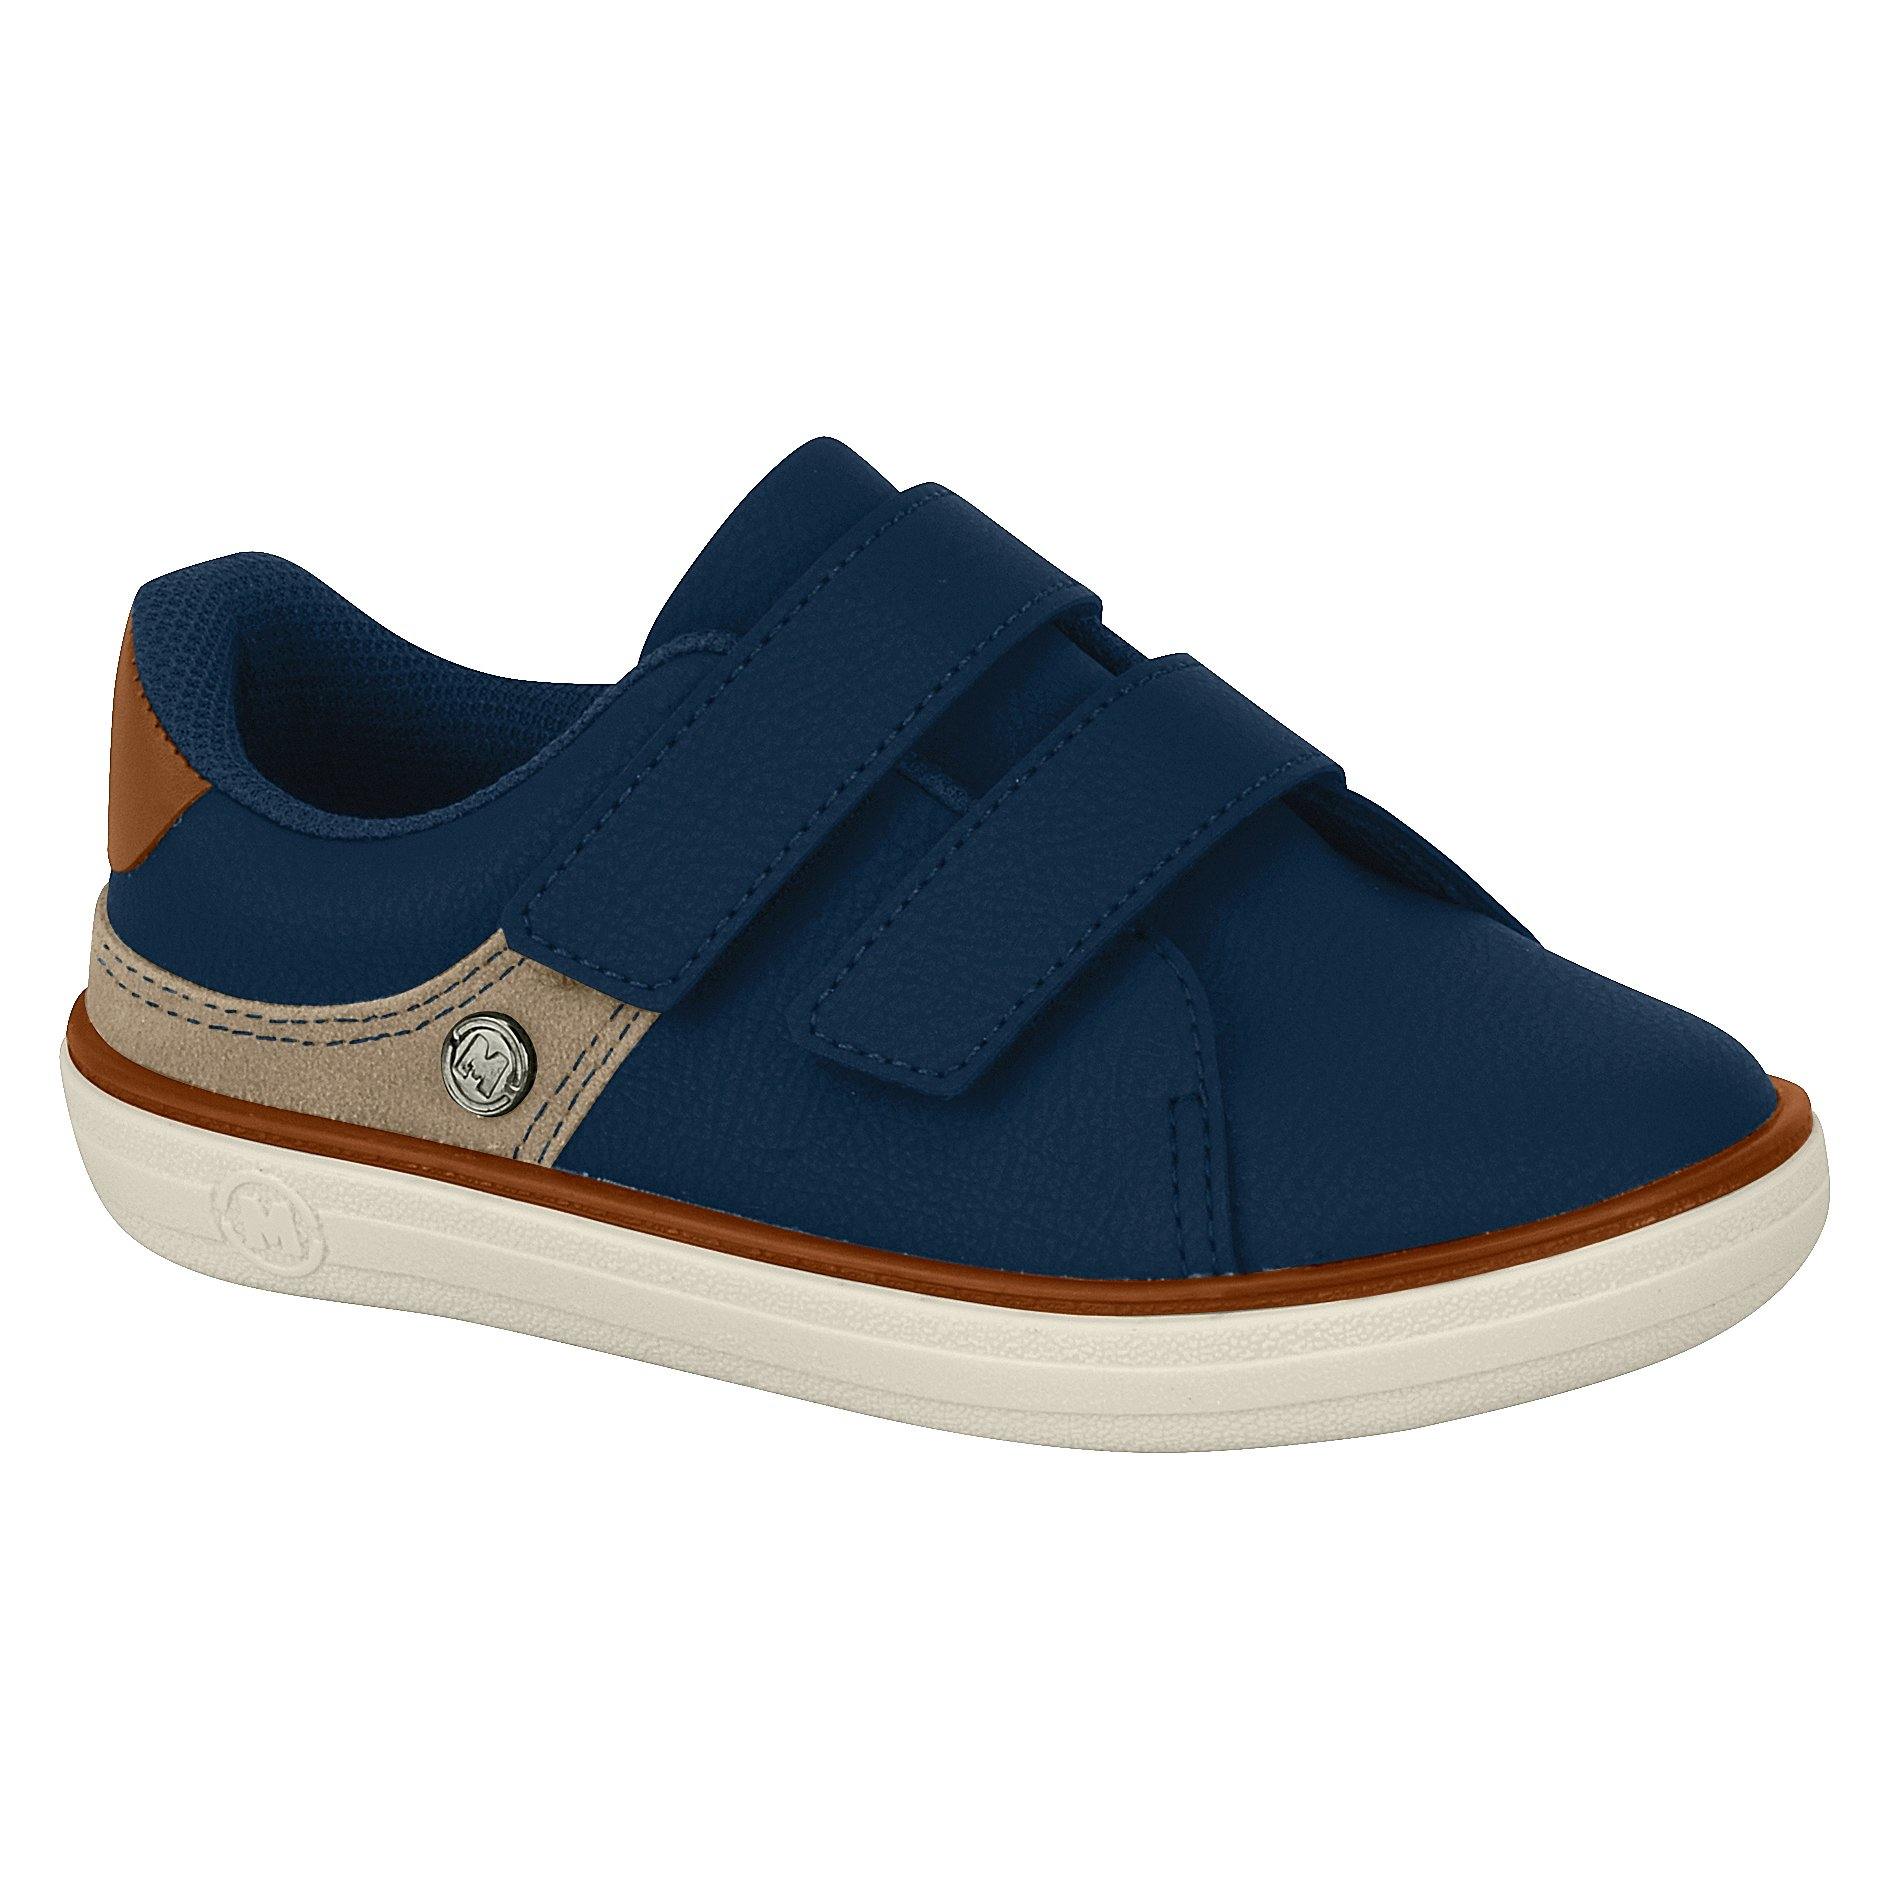 Molekinho 2603-100 Boys Sneaker with Velcro Straps in Navy - Charley Boutique